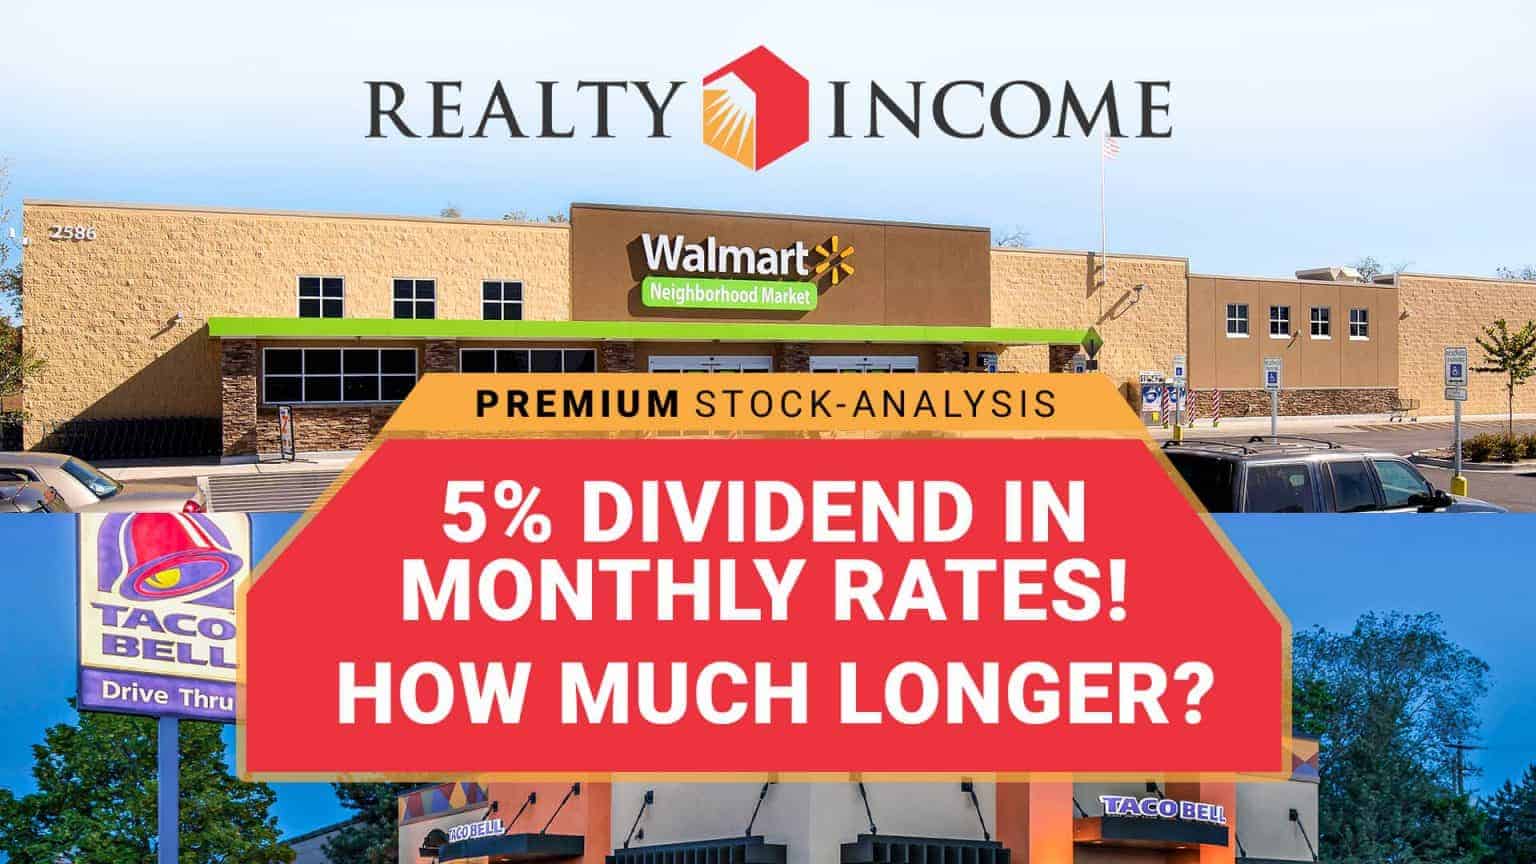 Realty stock 5 dividend in monthly rates How much longer?